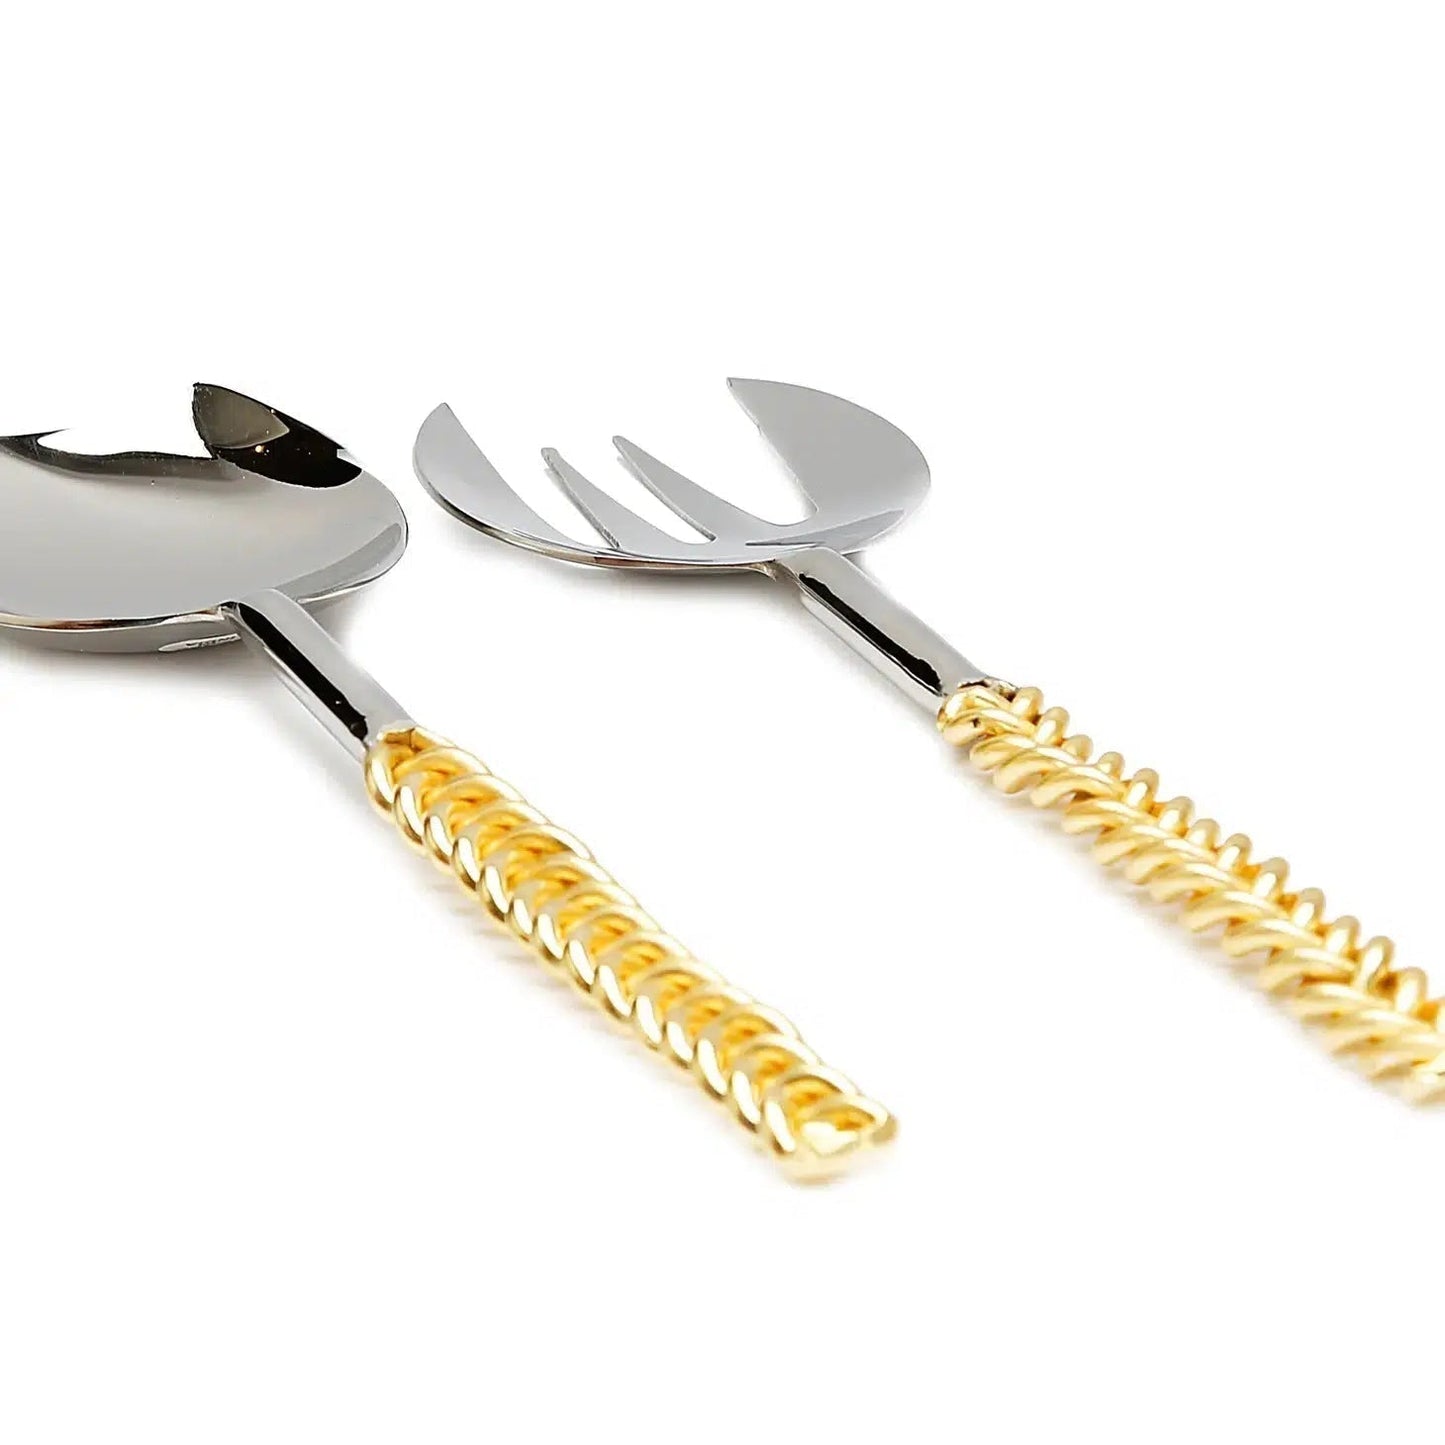 Set of 2 Salad Servers with Gold Twisted Handles Salad server set High Class Touch - Home Decor 